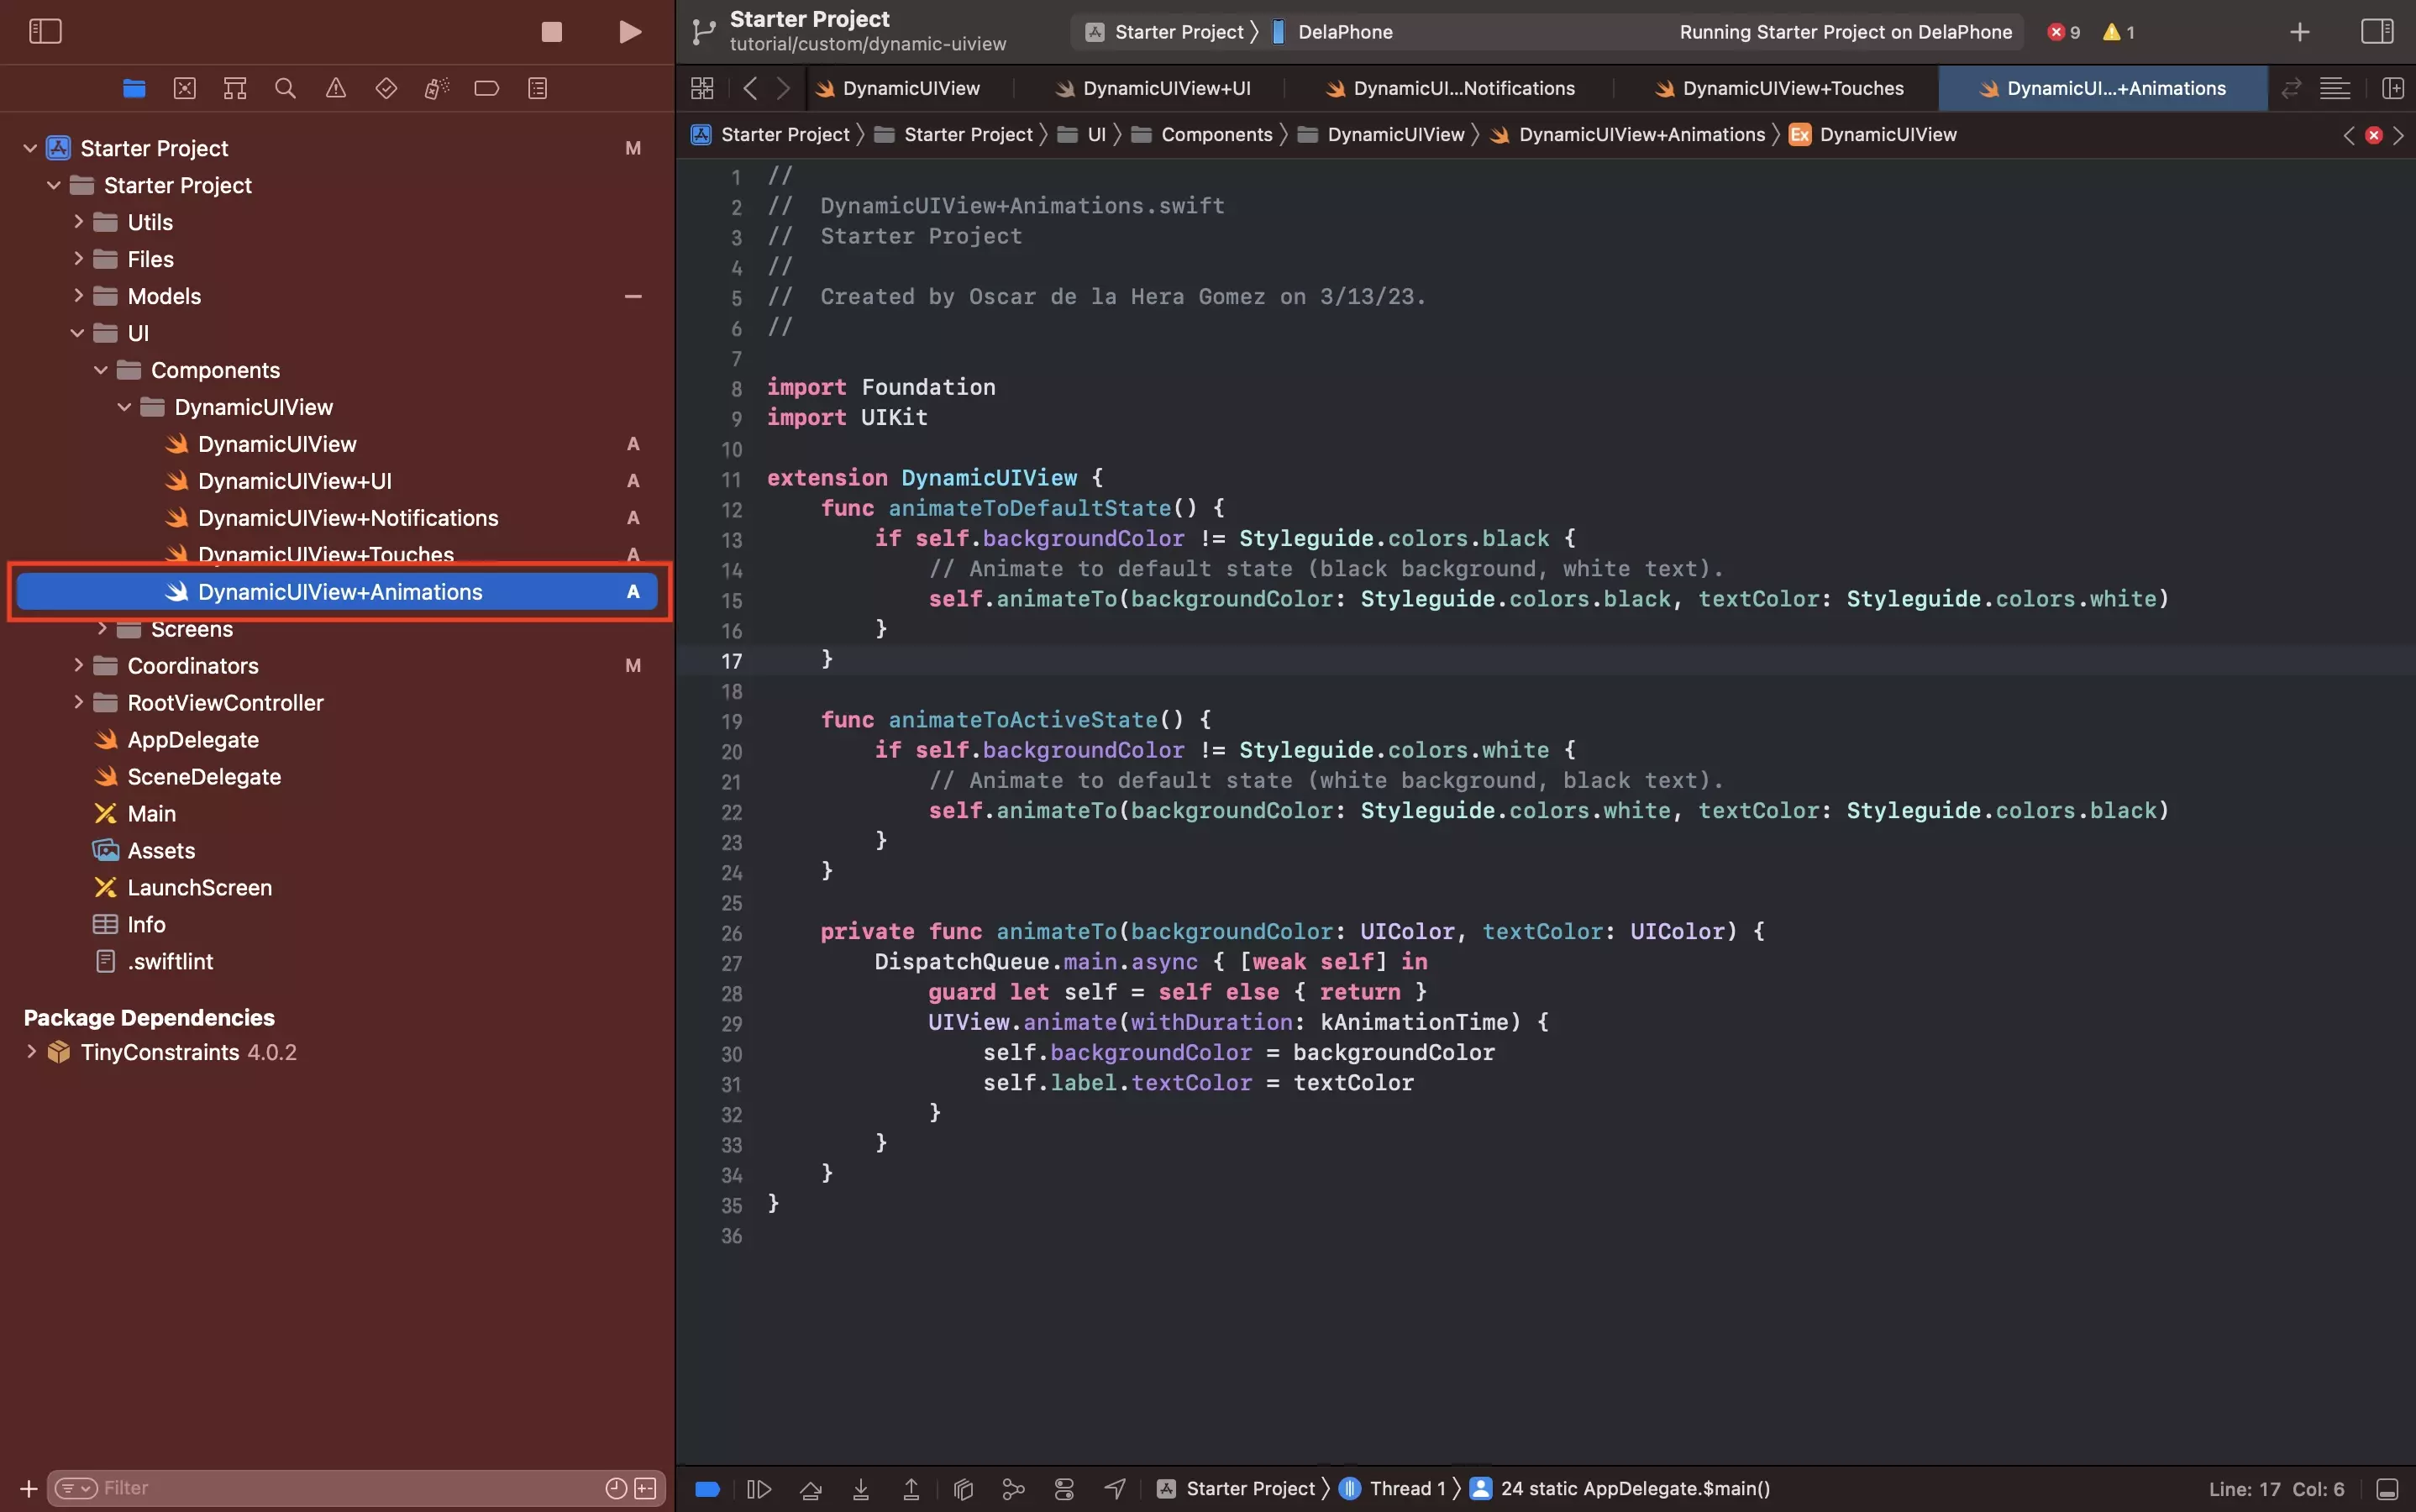 A screenshot of Xcode showing the DynamicUIView+Animations.swift file, the code is available below.